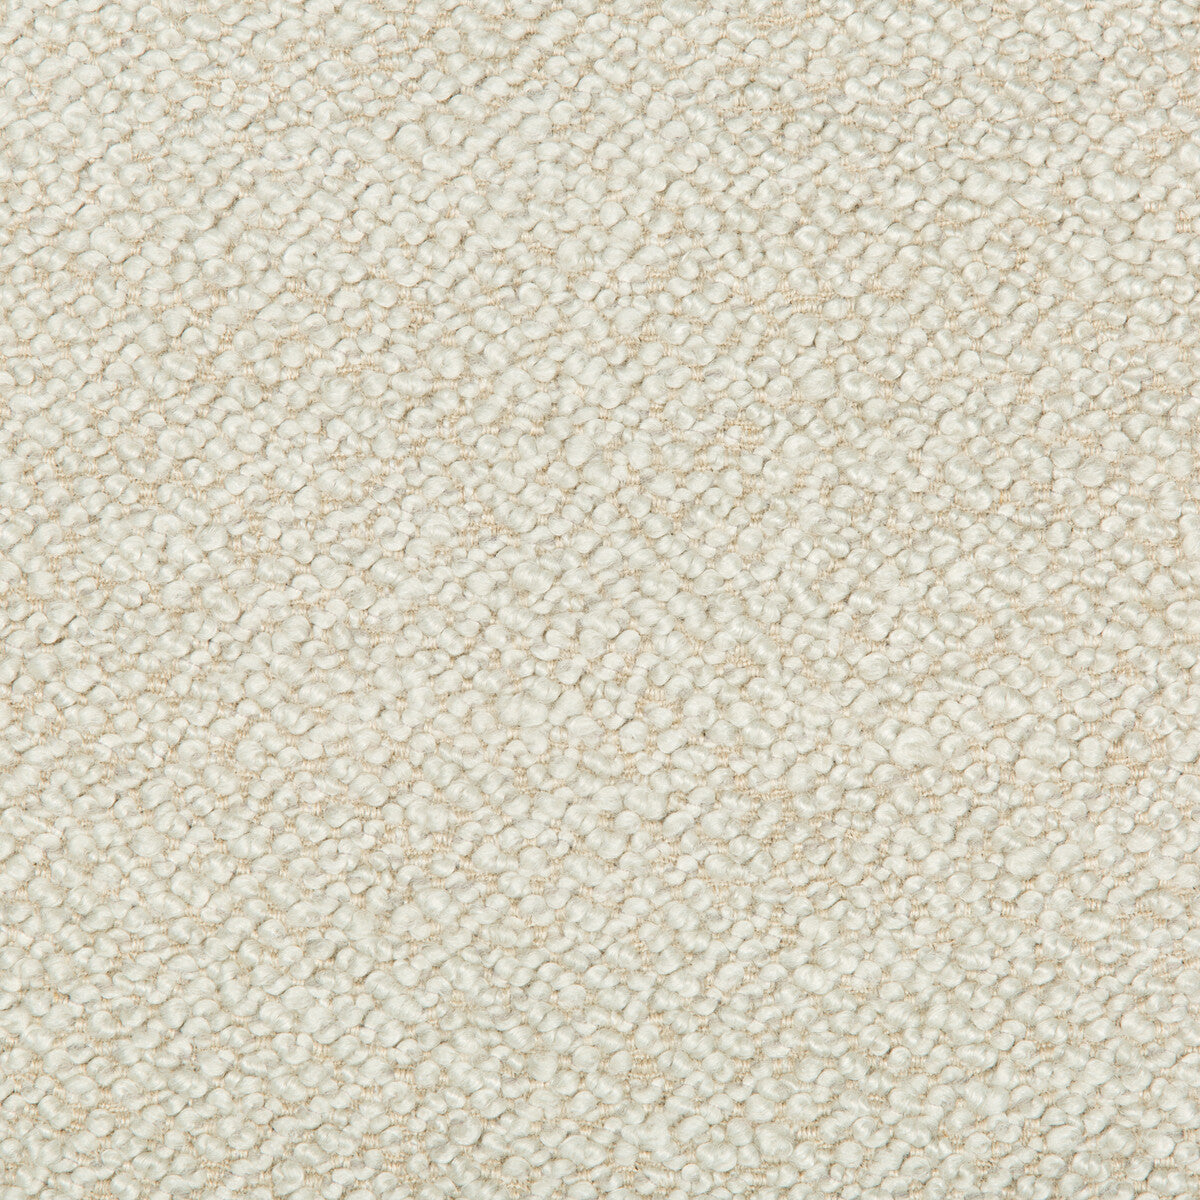 Babbit fabric in vapor color - pattern 34956.11.0 - by Kravet Couture in the Sue Firestone Malibu collection